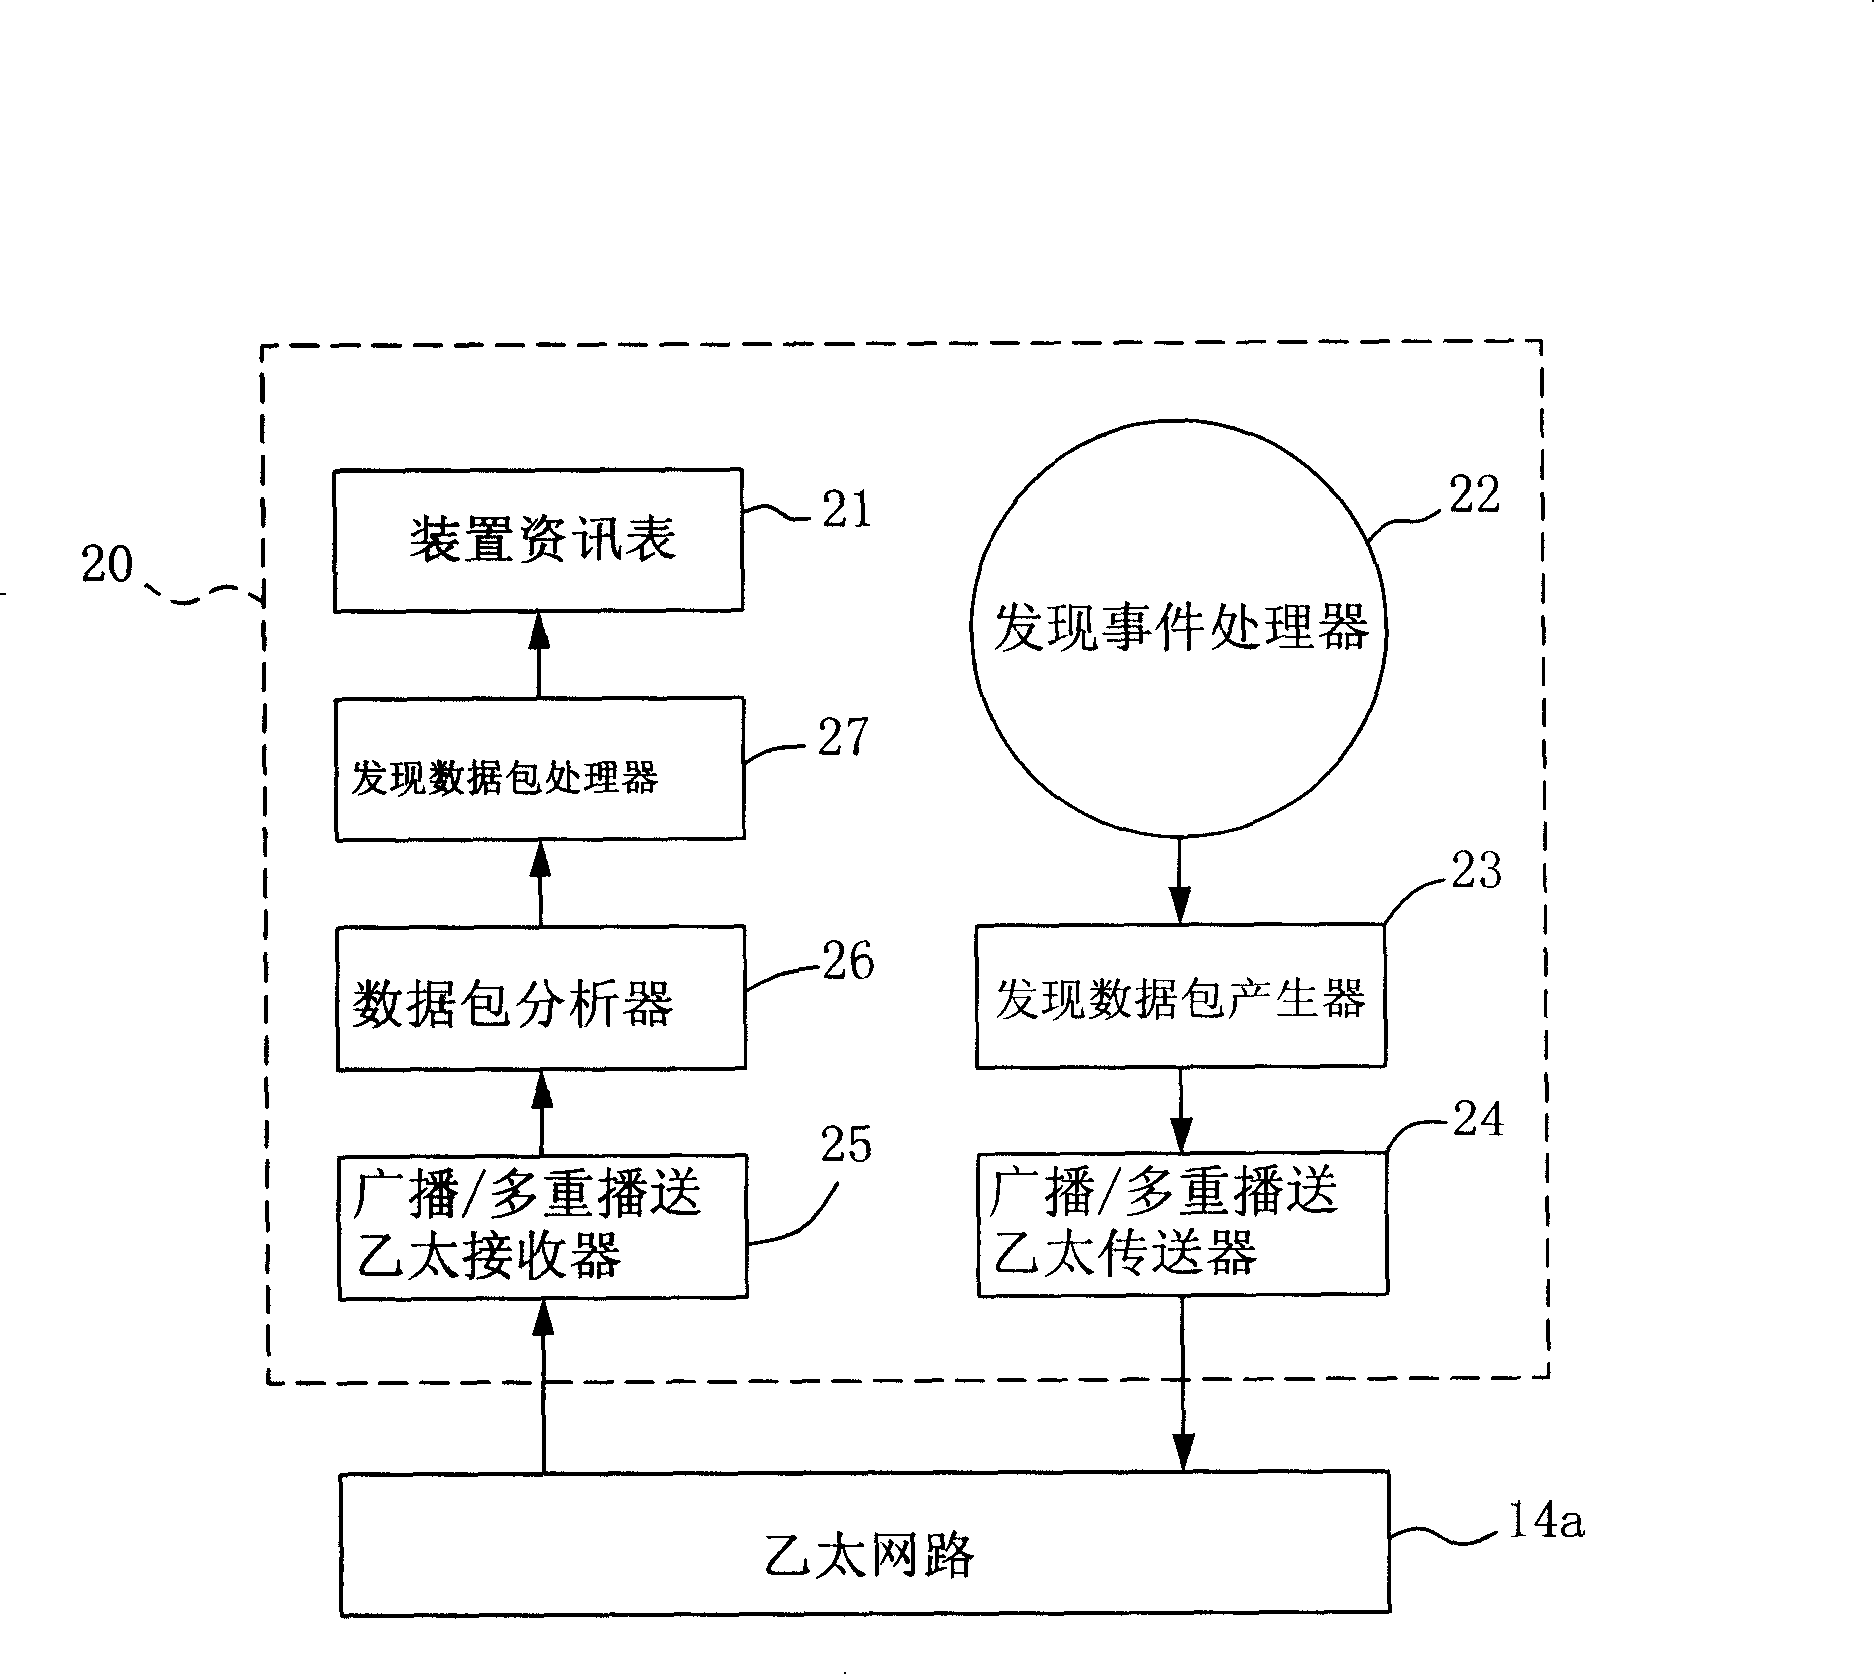 Network apparatus discover method